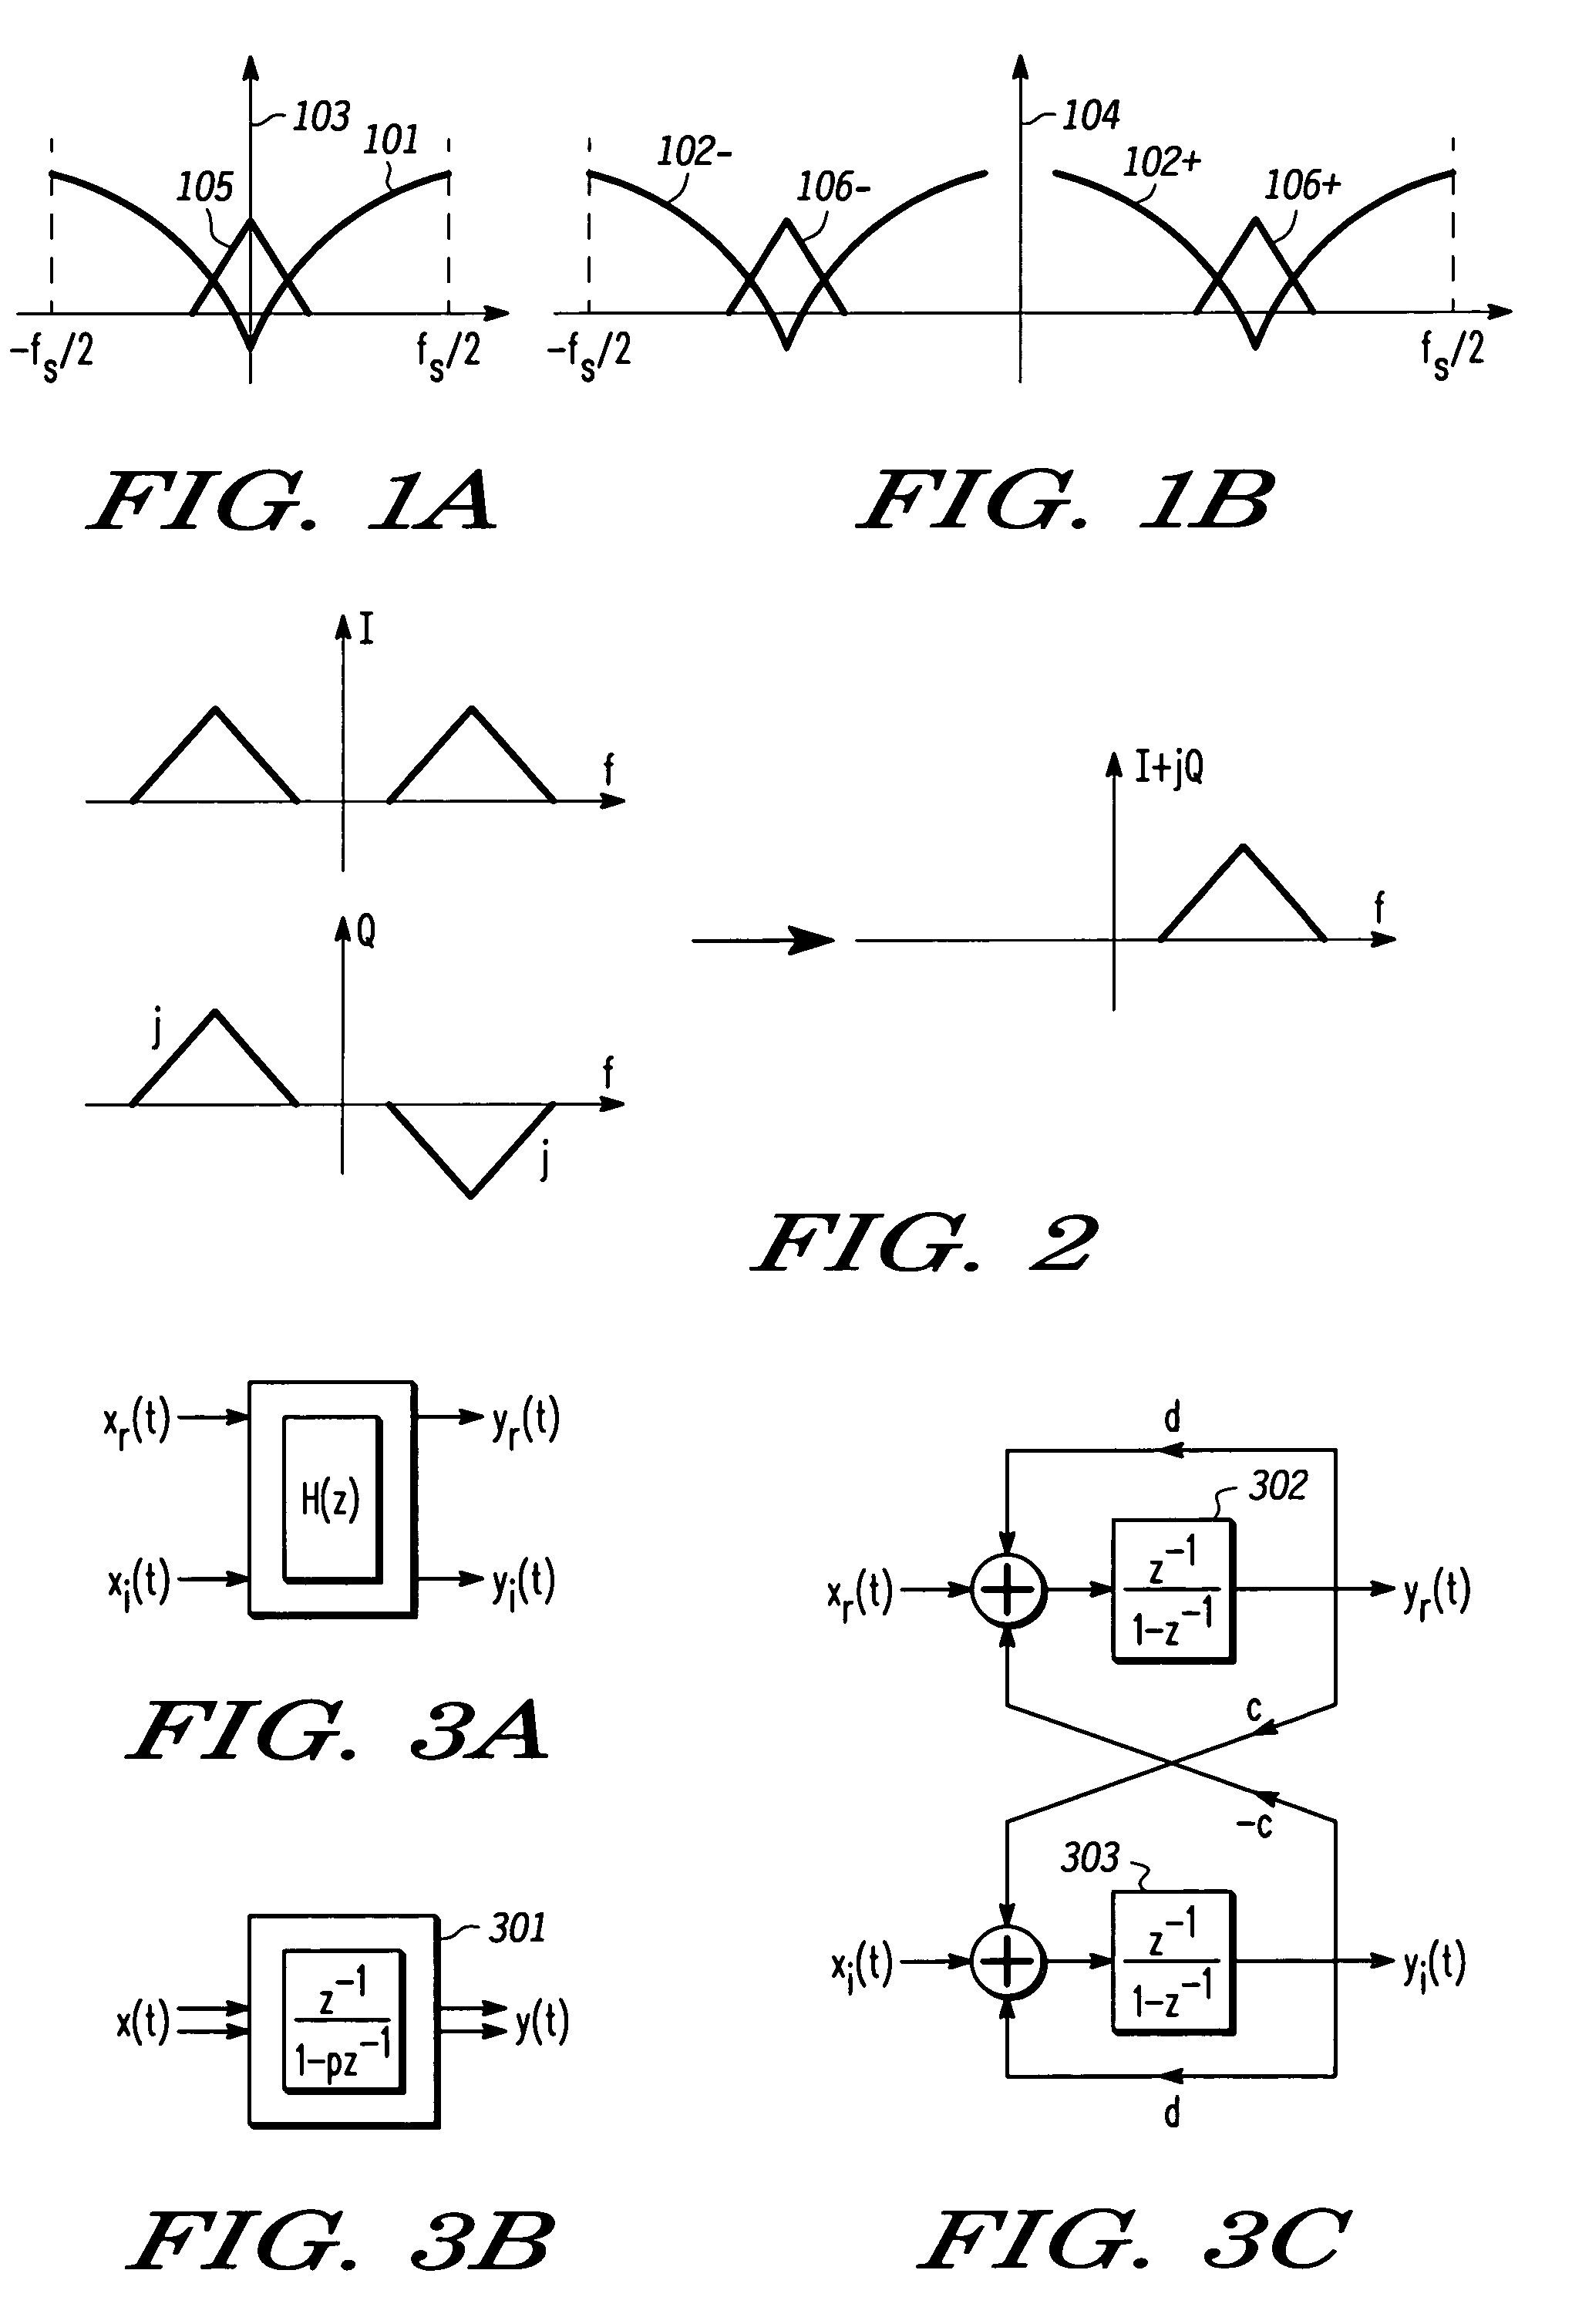 Method and apparatus for complex cascade sigma-delta modulation and single-sideband analog-to-digital conversion